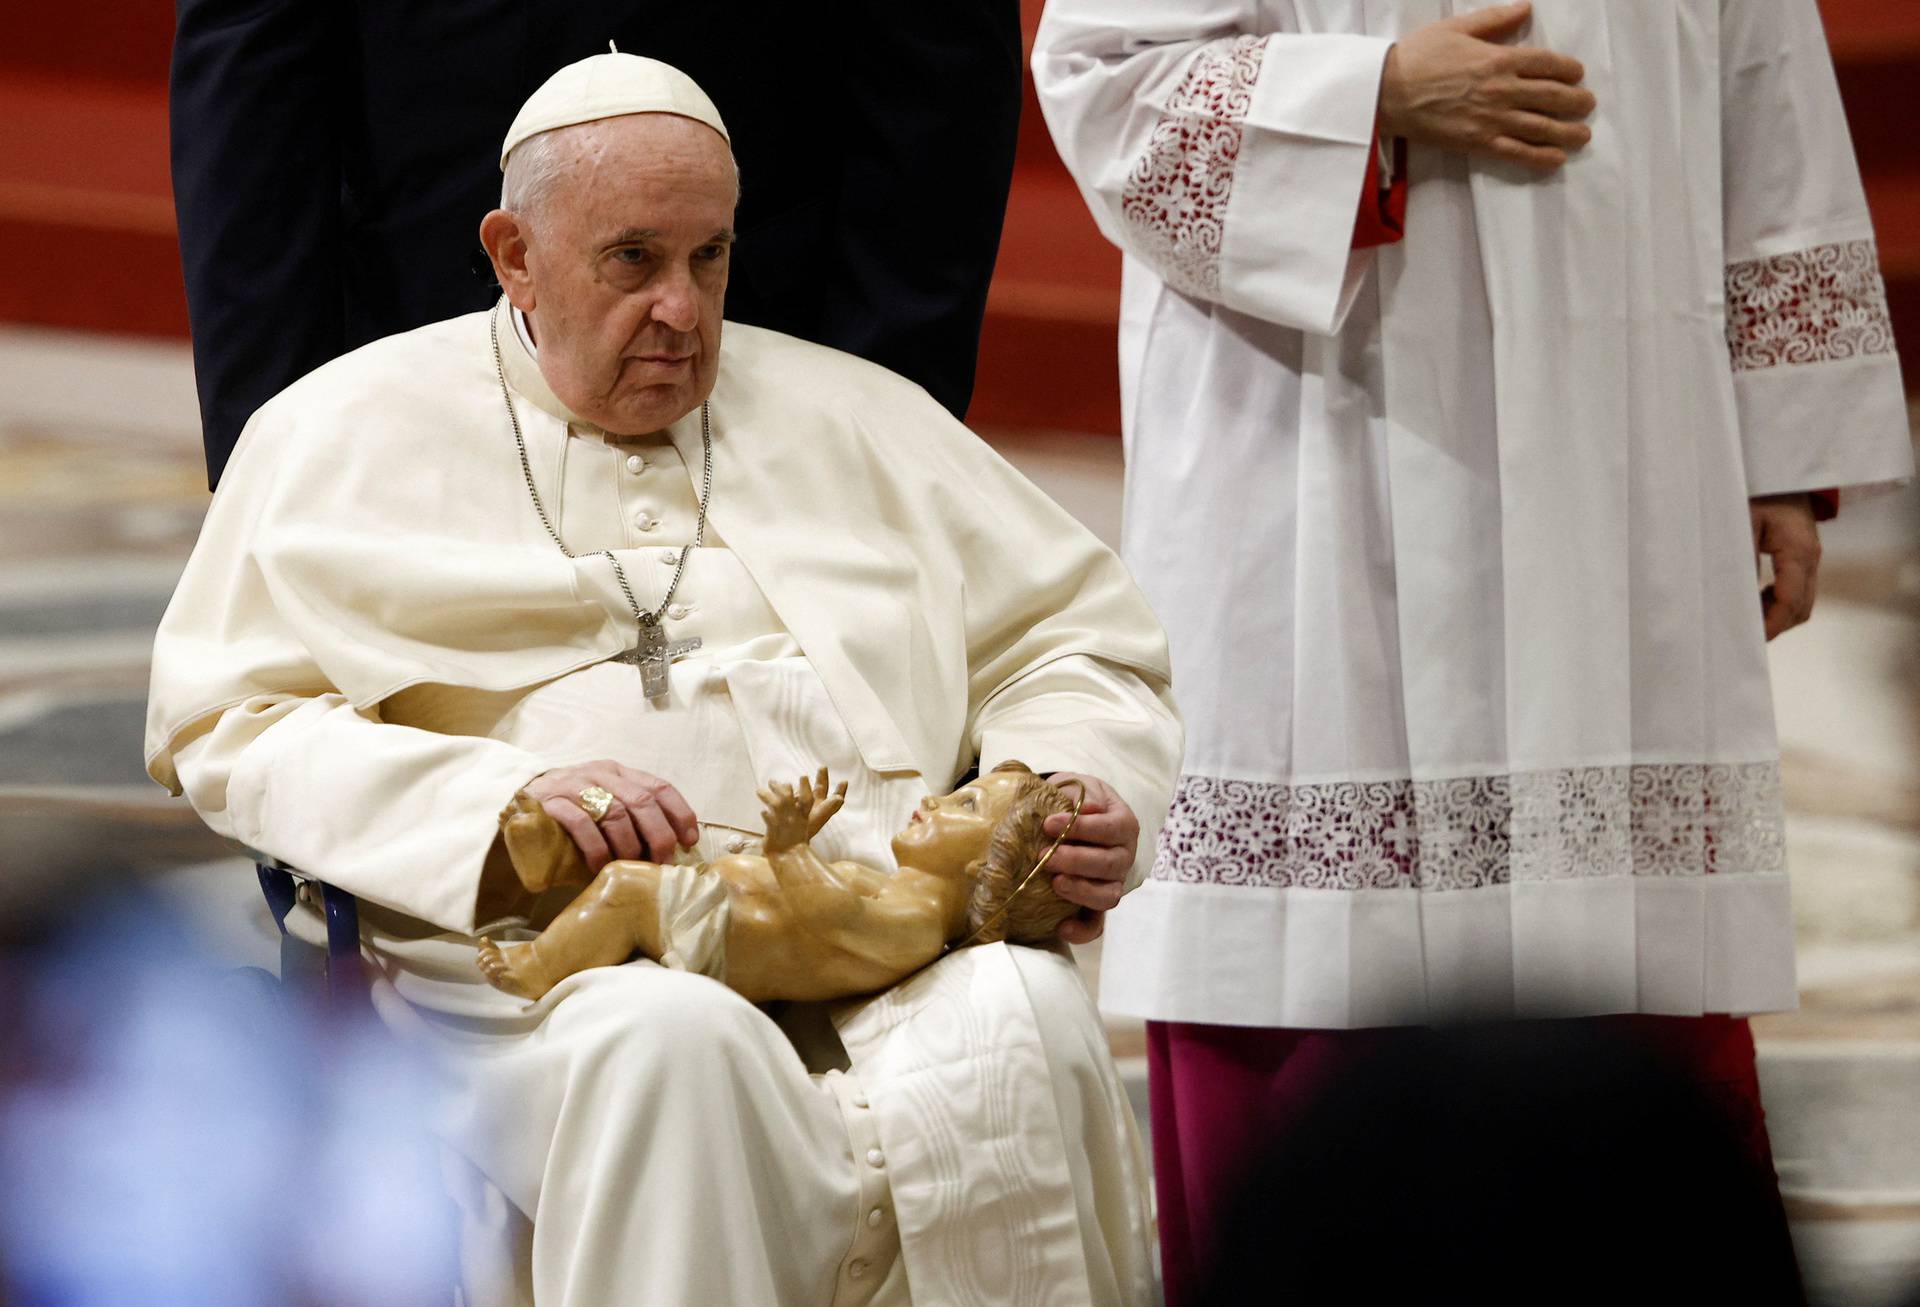 Pope Francis celebrates Christmas Eve mass at the Vatican